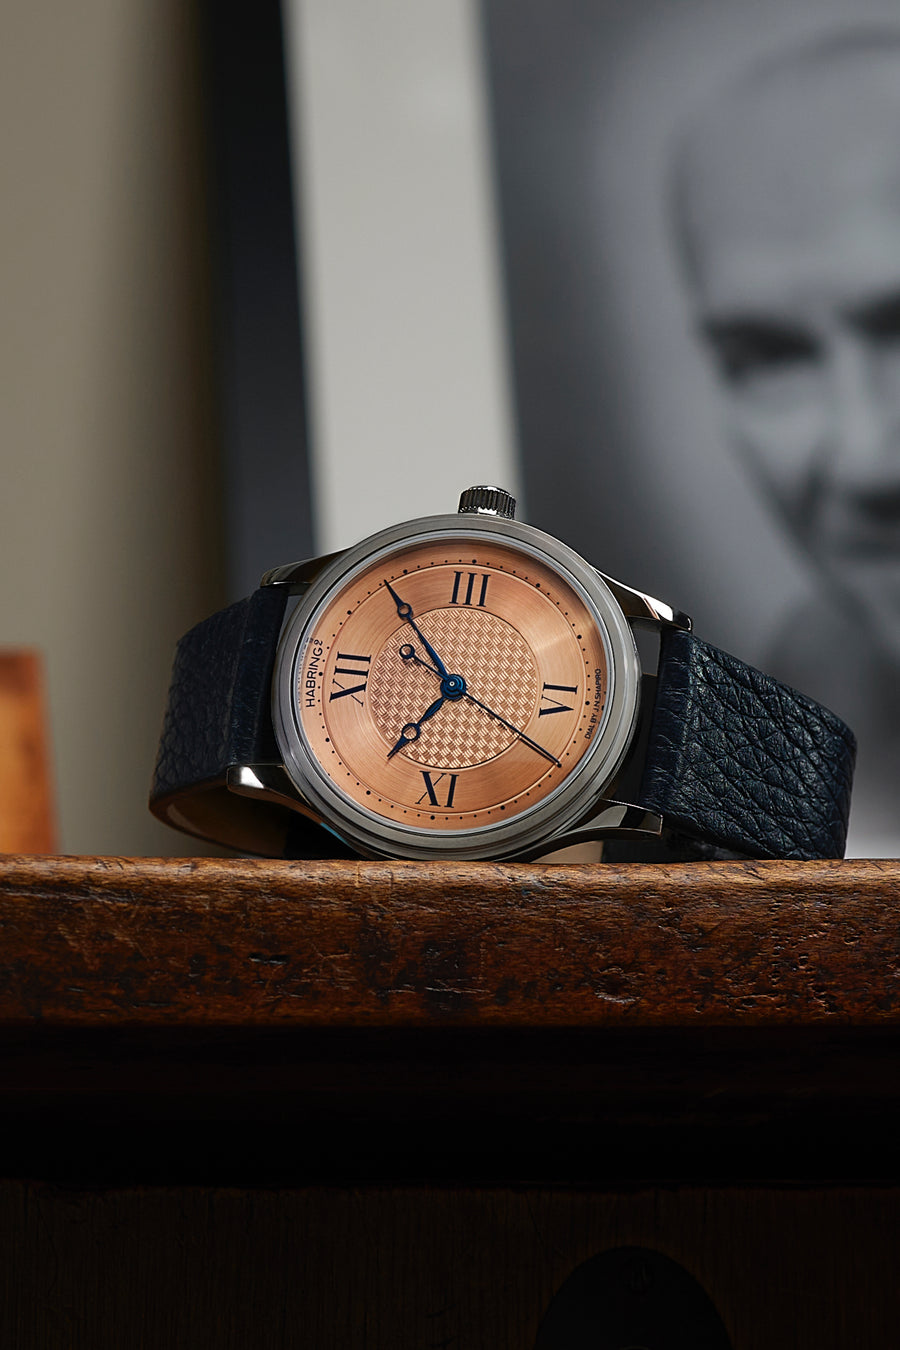 The Massena LAB x Habring² ERWIN LAB03 features a bronze guilloché dial by J.N. Shapiro.